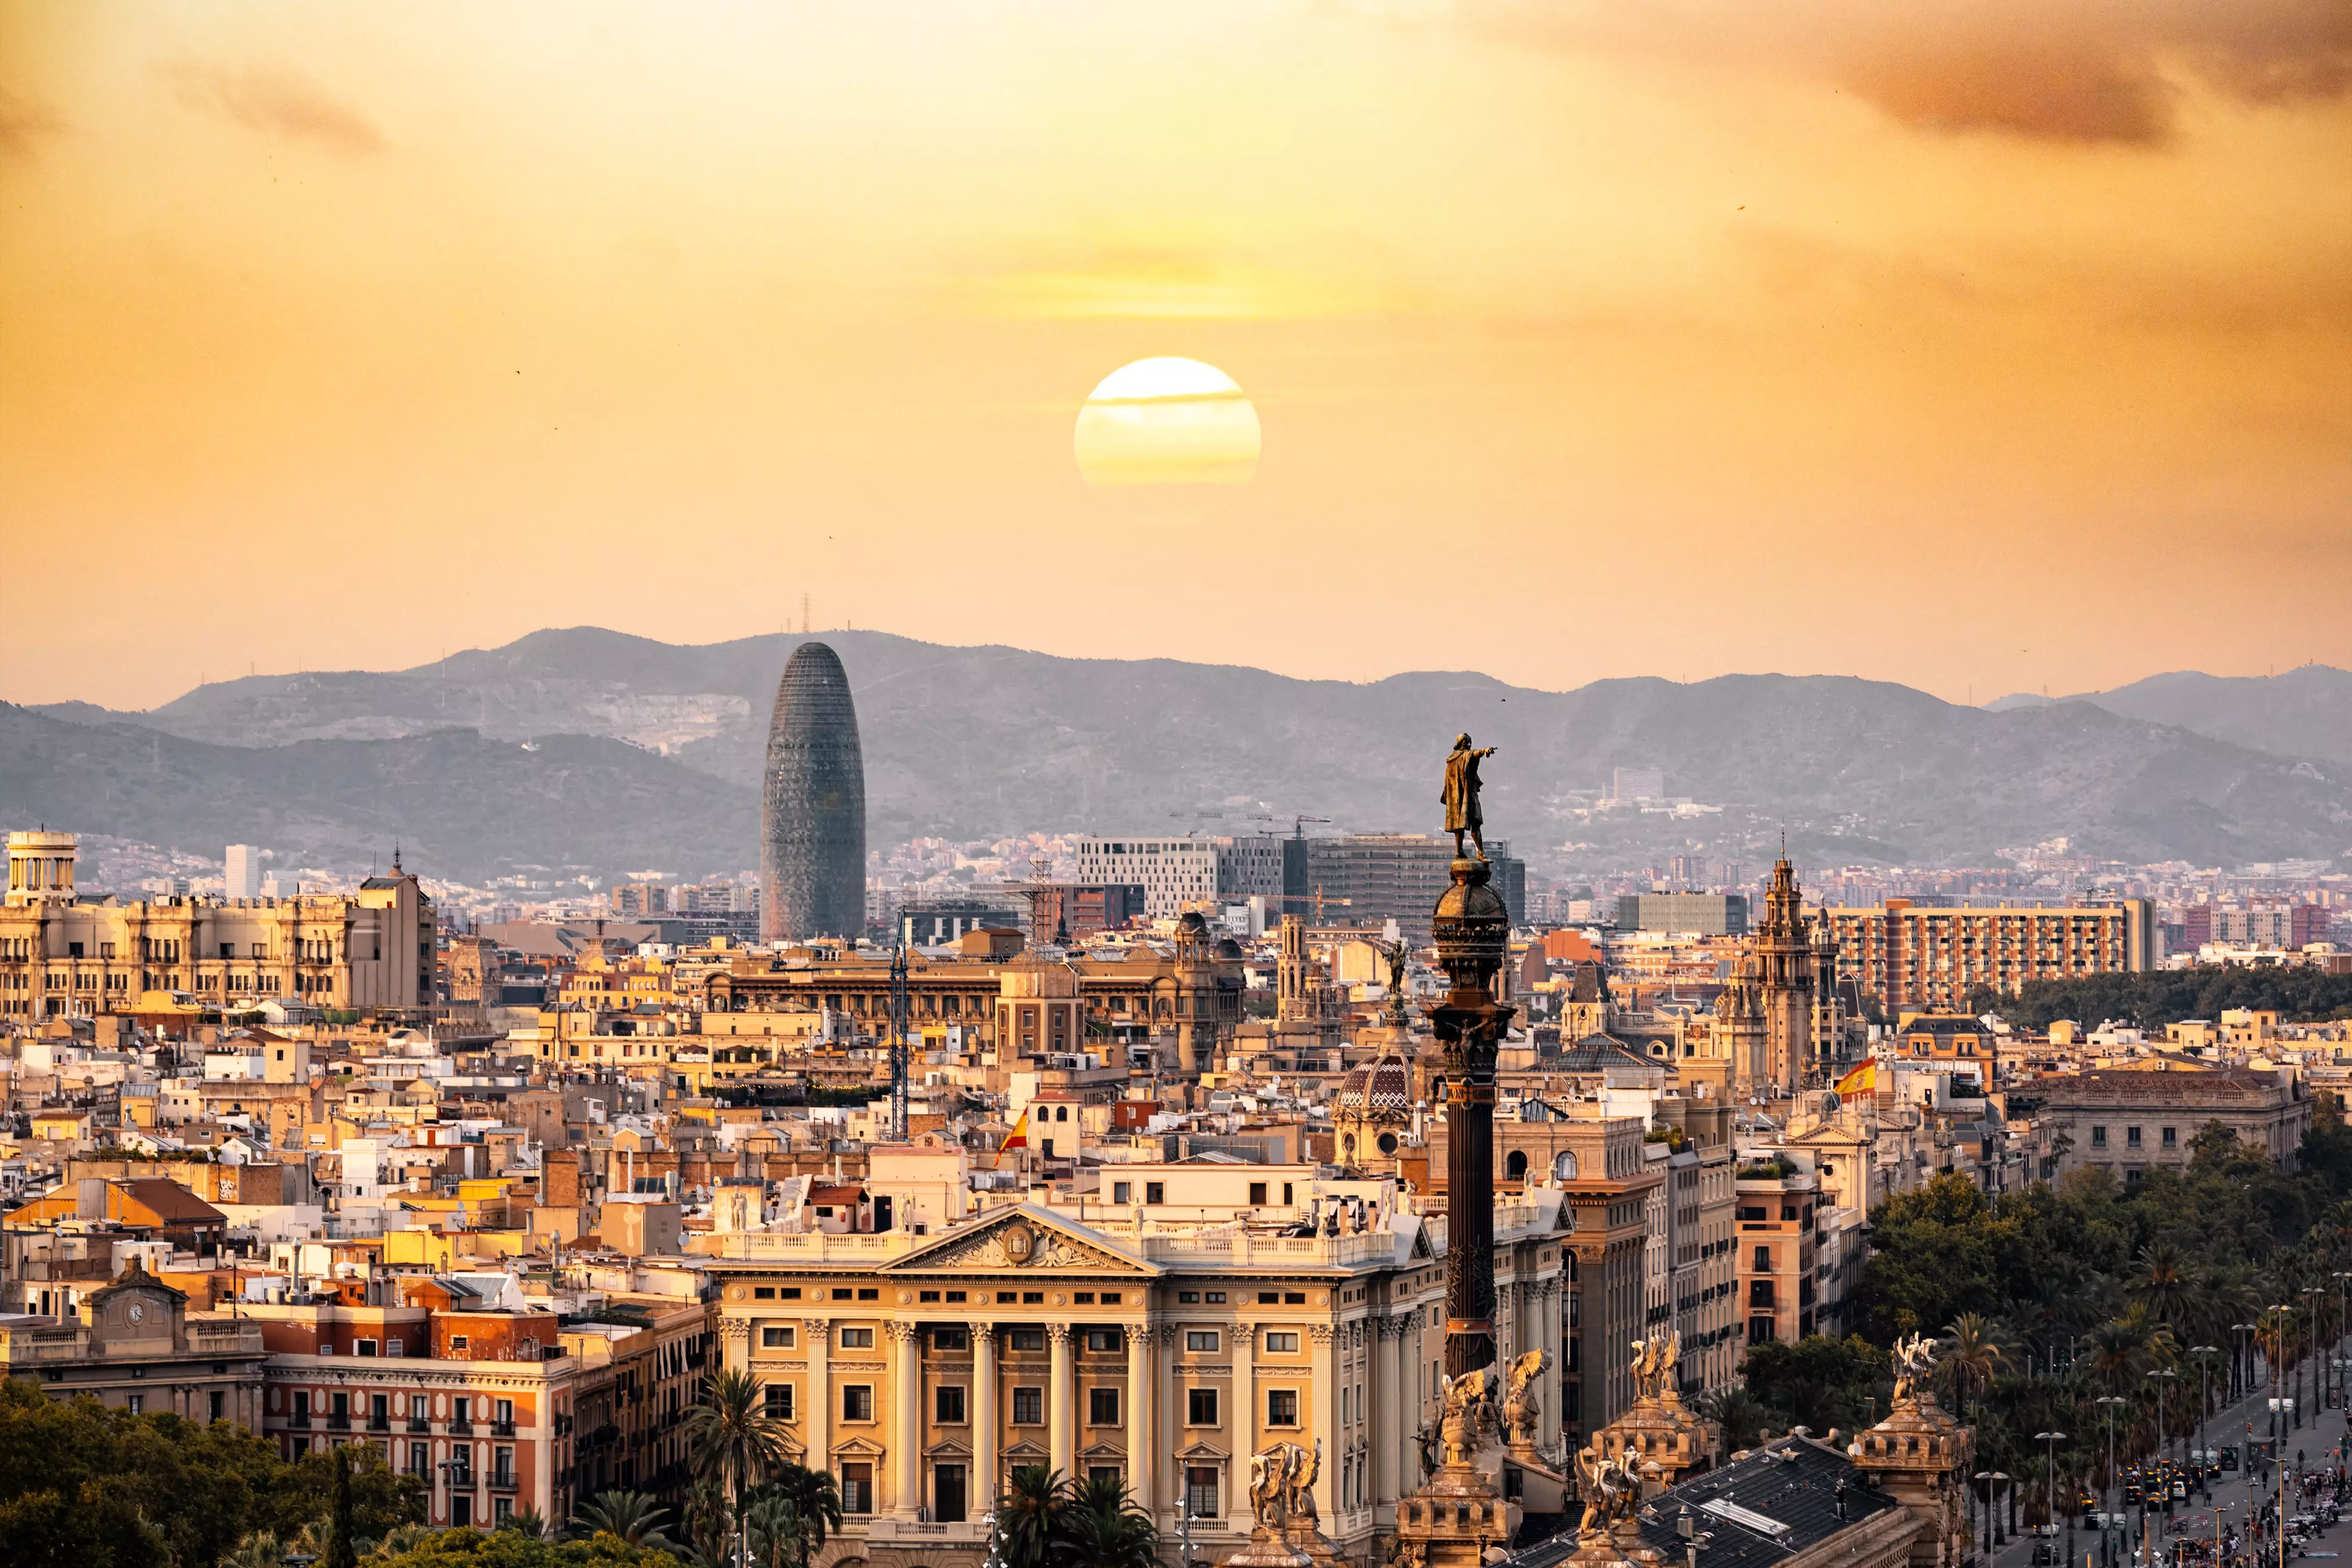 Barcelona is one of the destinations available for £99.